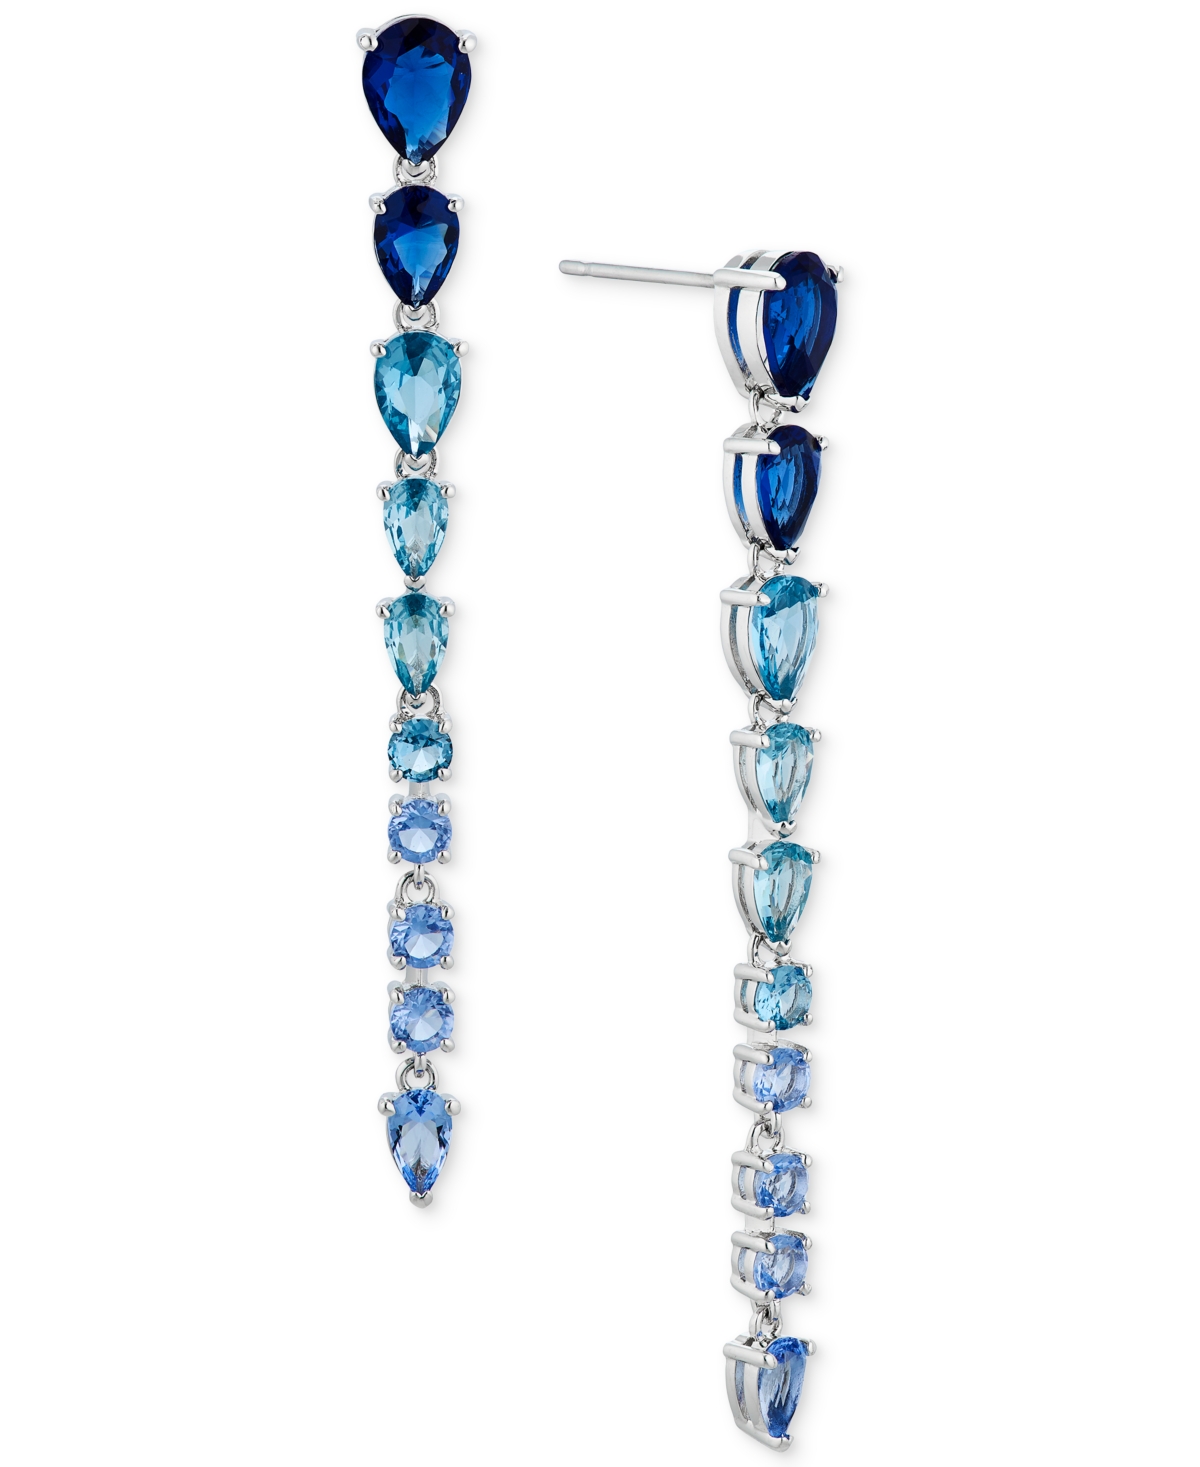 Silver-Tone Mixed Stone Long Linear Drop Earrings, Created for Macy's - Blue